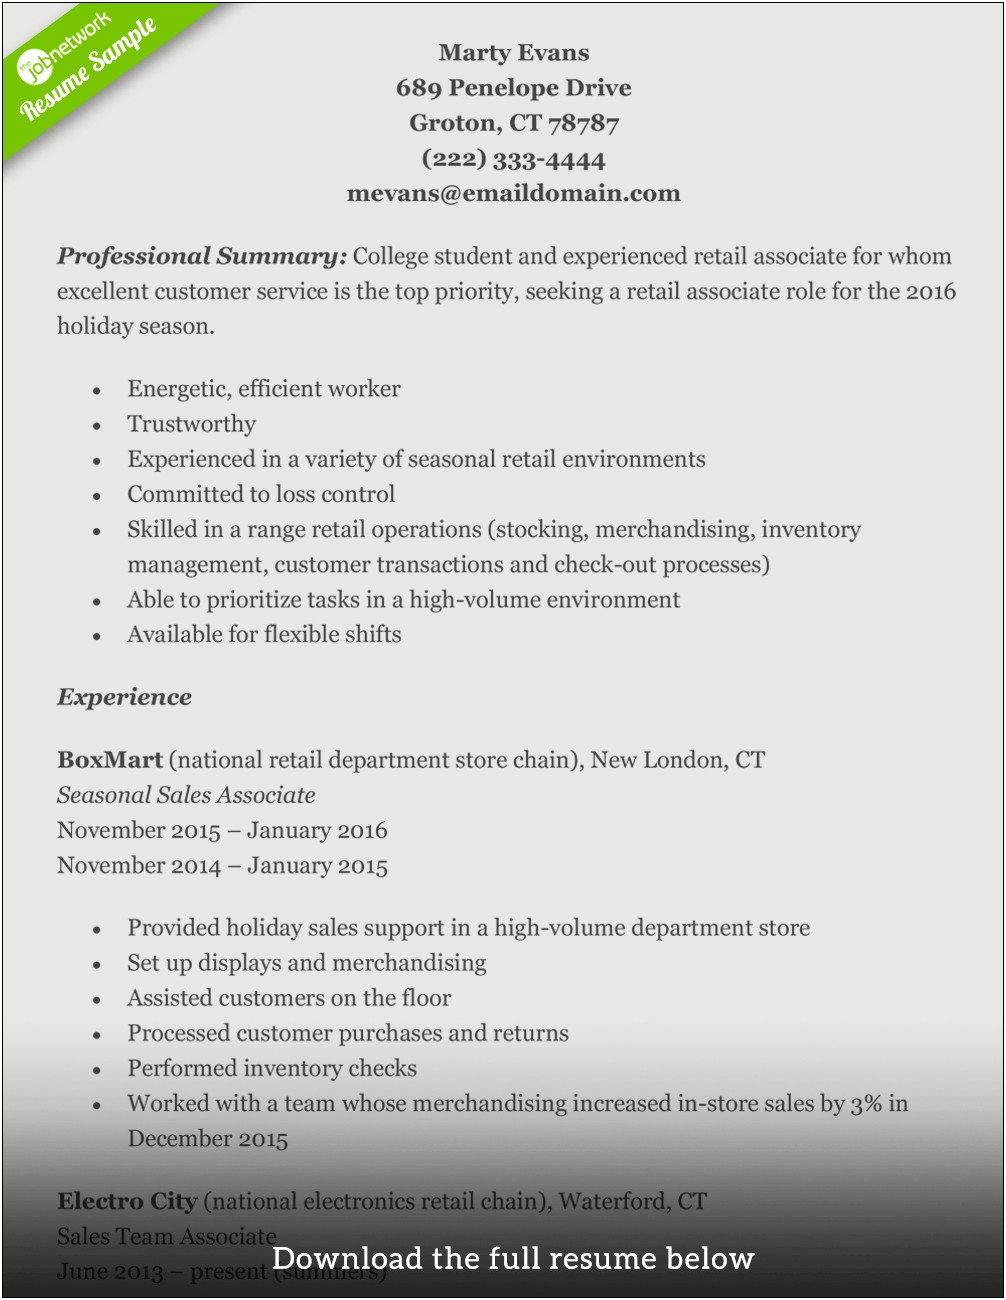 Resume Examples 2015 For Jobs